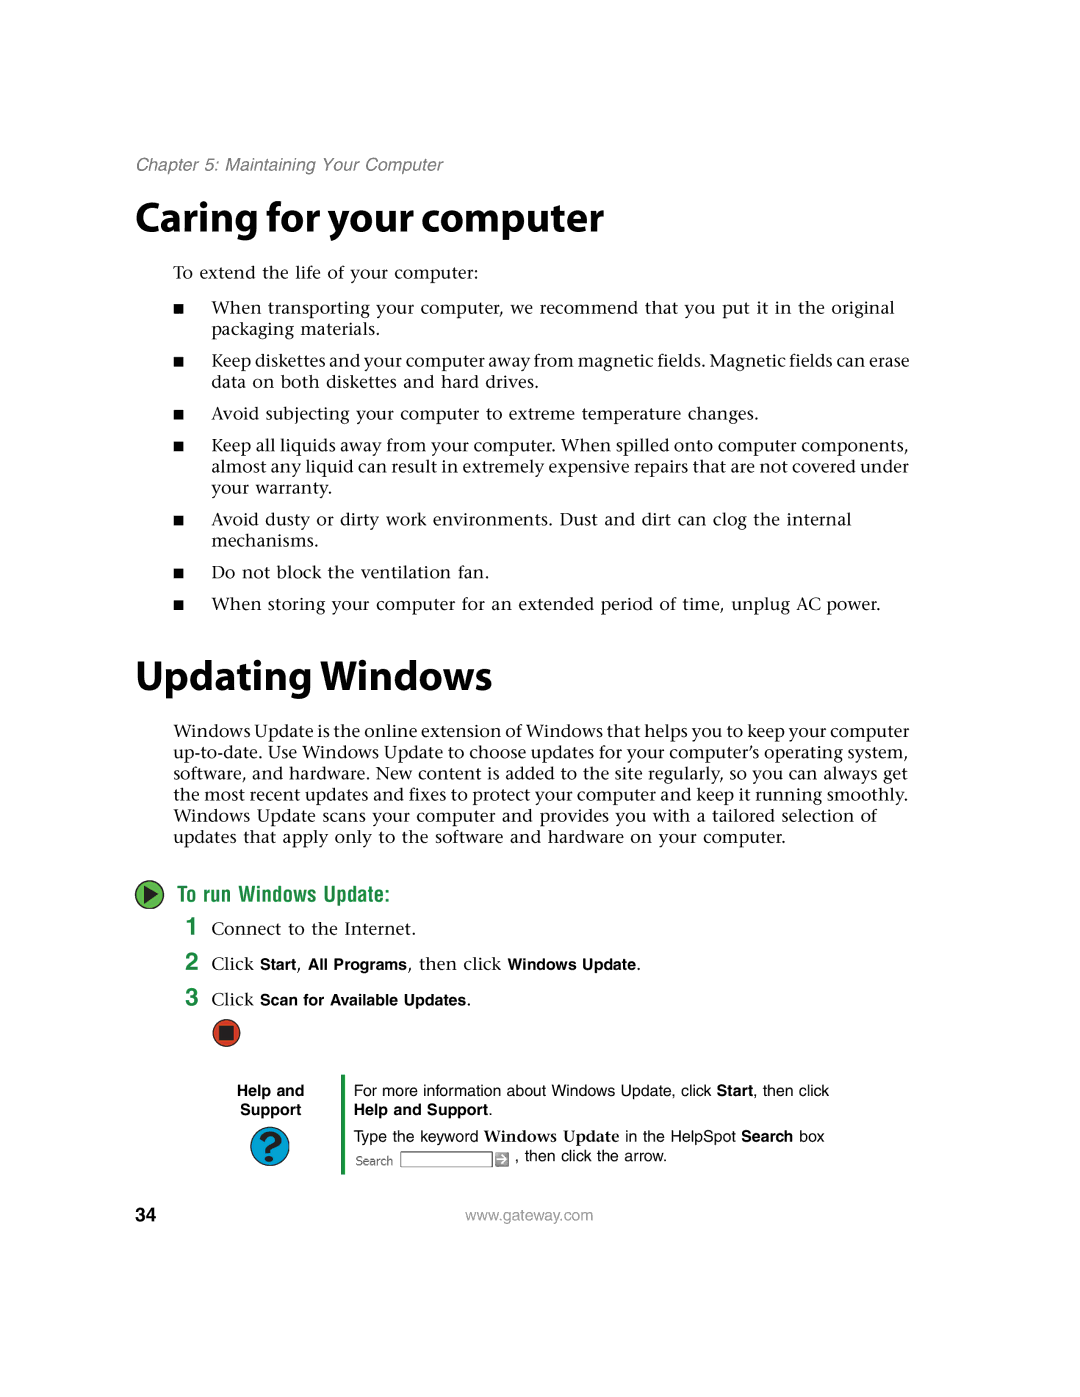 Gateway E4350 manual Caring for your computer, Updating Windows, To run Windows Update 